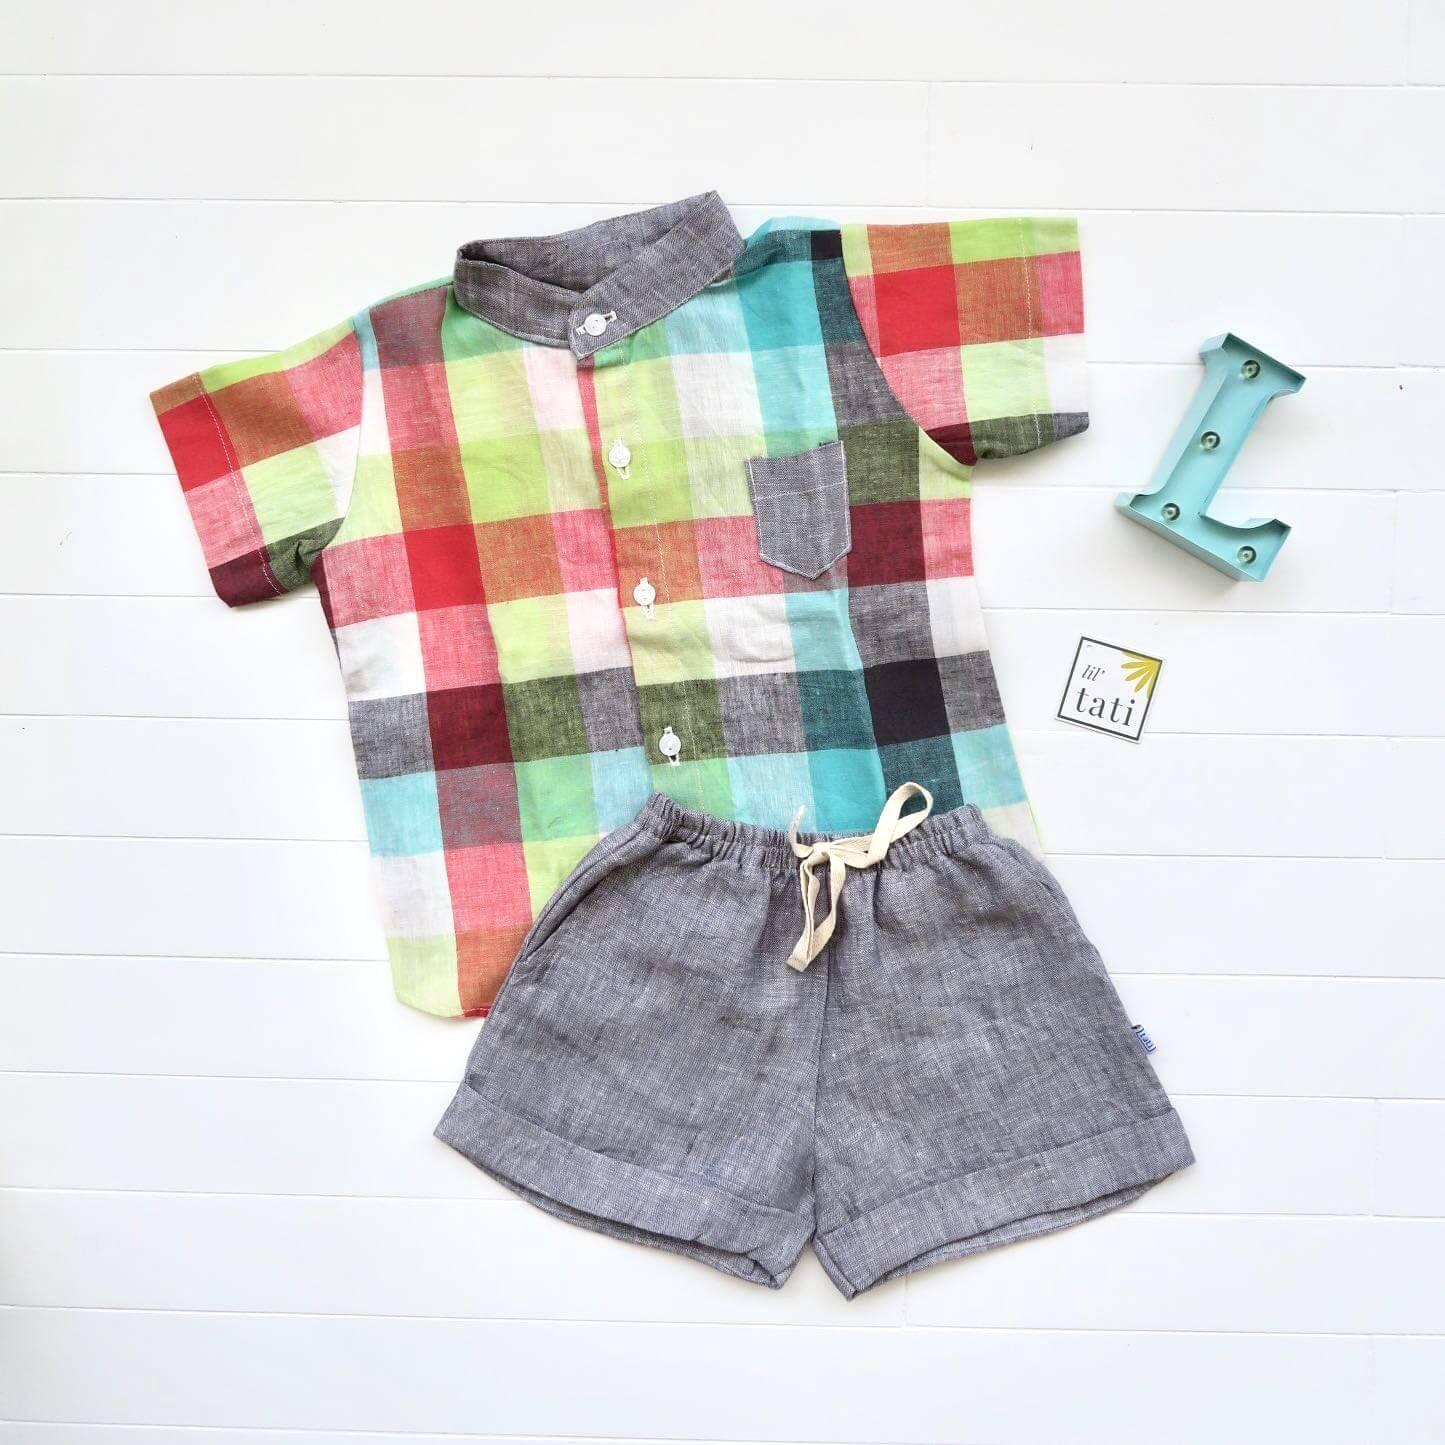 Cedar Top & Shorts in Playful Checkered and Gray Linen - Lil' Tati